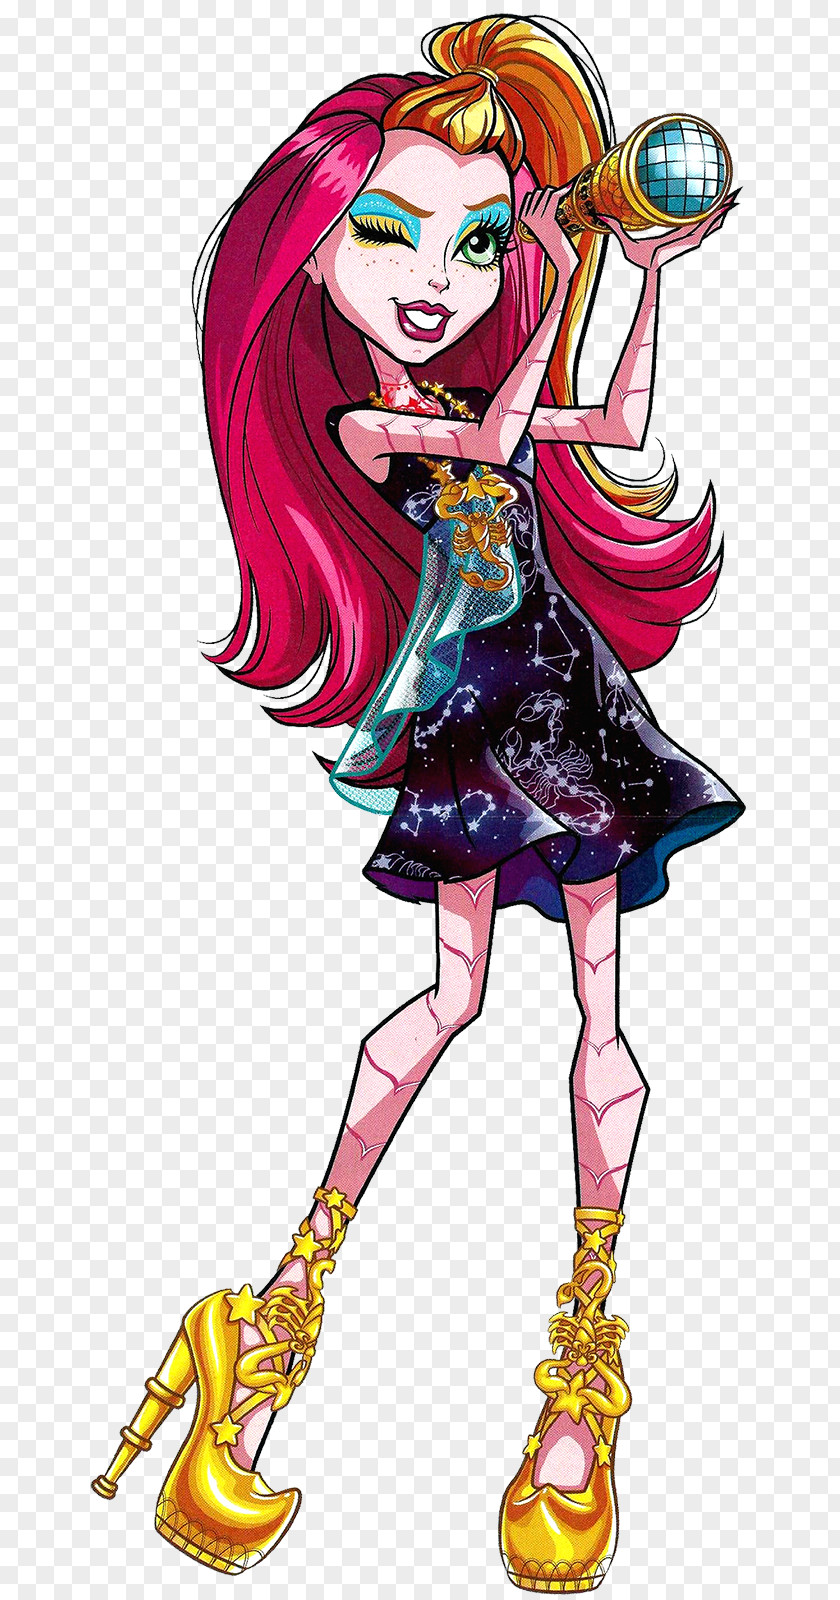 Doll Monster High: 13 Wishes High Gigi Grant Toy PNG